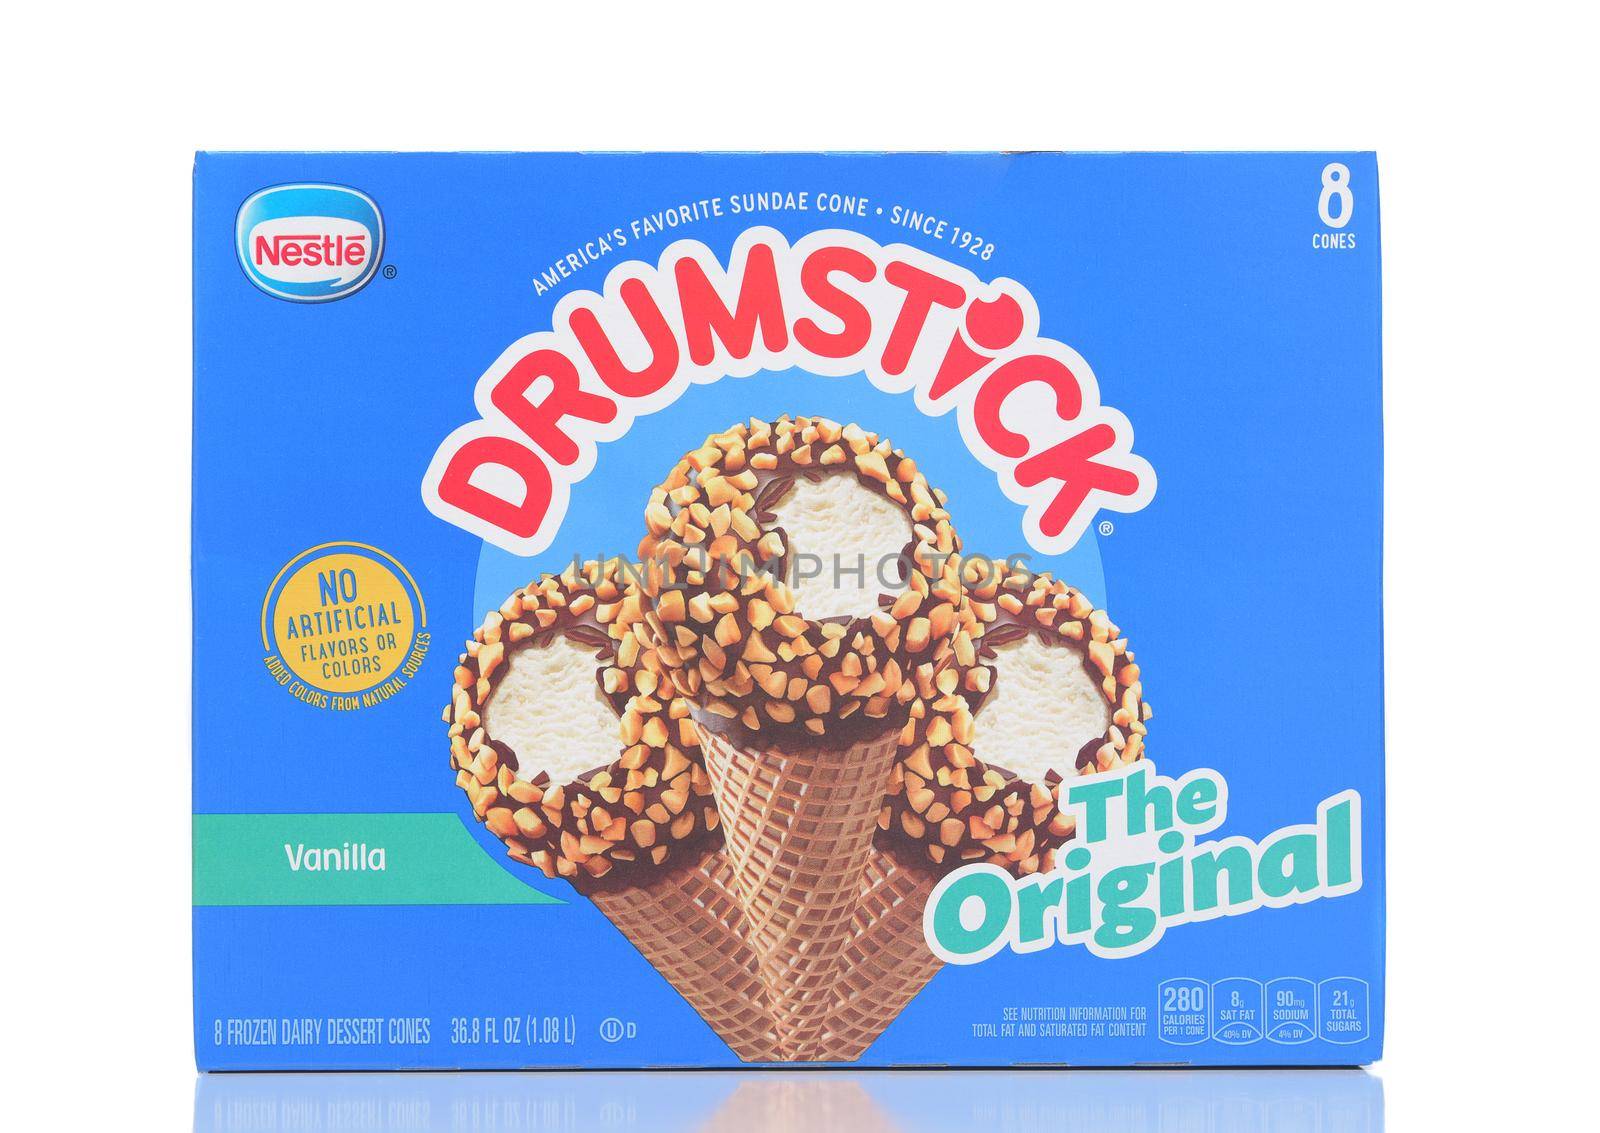 IRVINE, CALIFORNIA - 28 MAY 2021: An 8 pack box of The Original Vanilla Drumstick brand Ice Cream Novelty from Nestle. by sCukrov